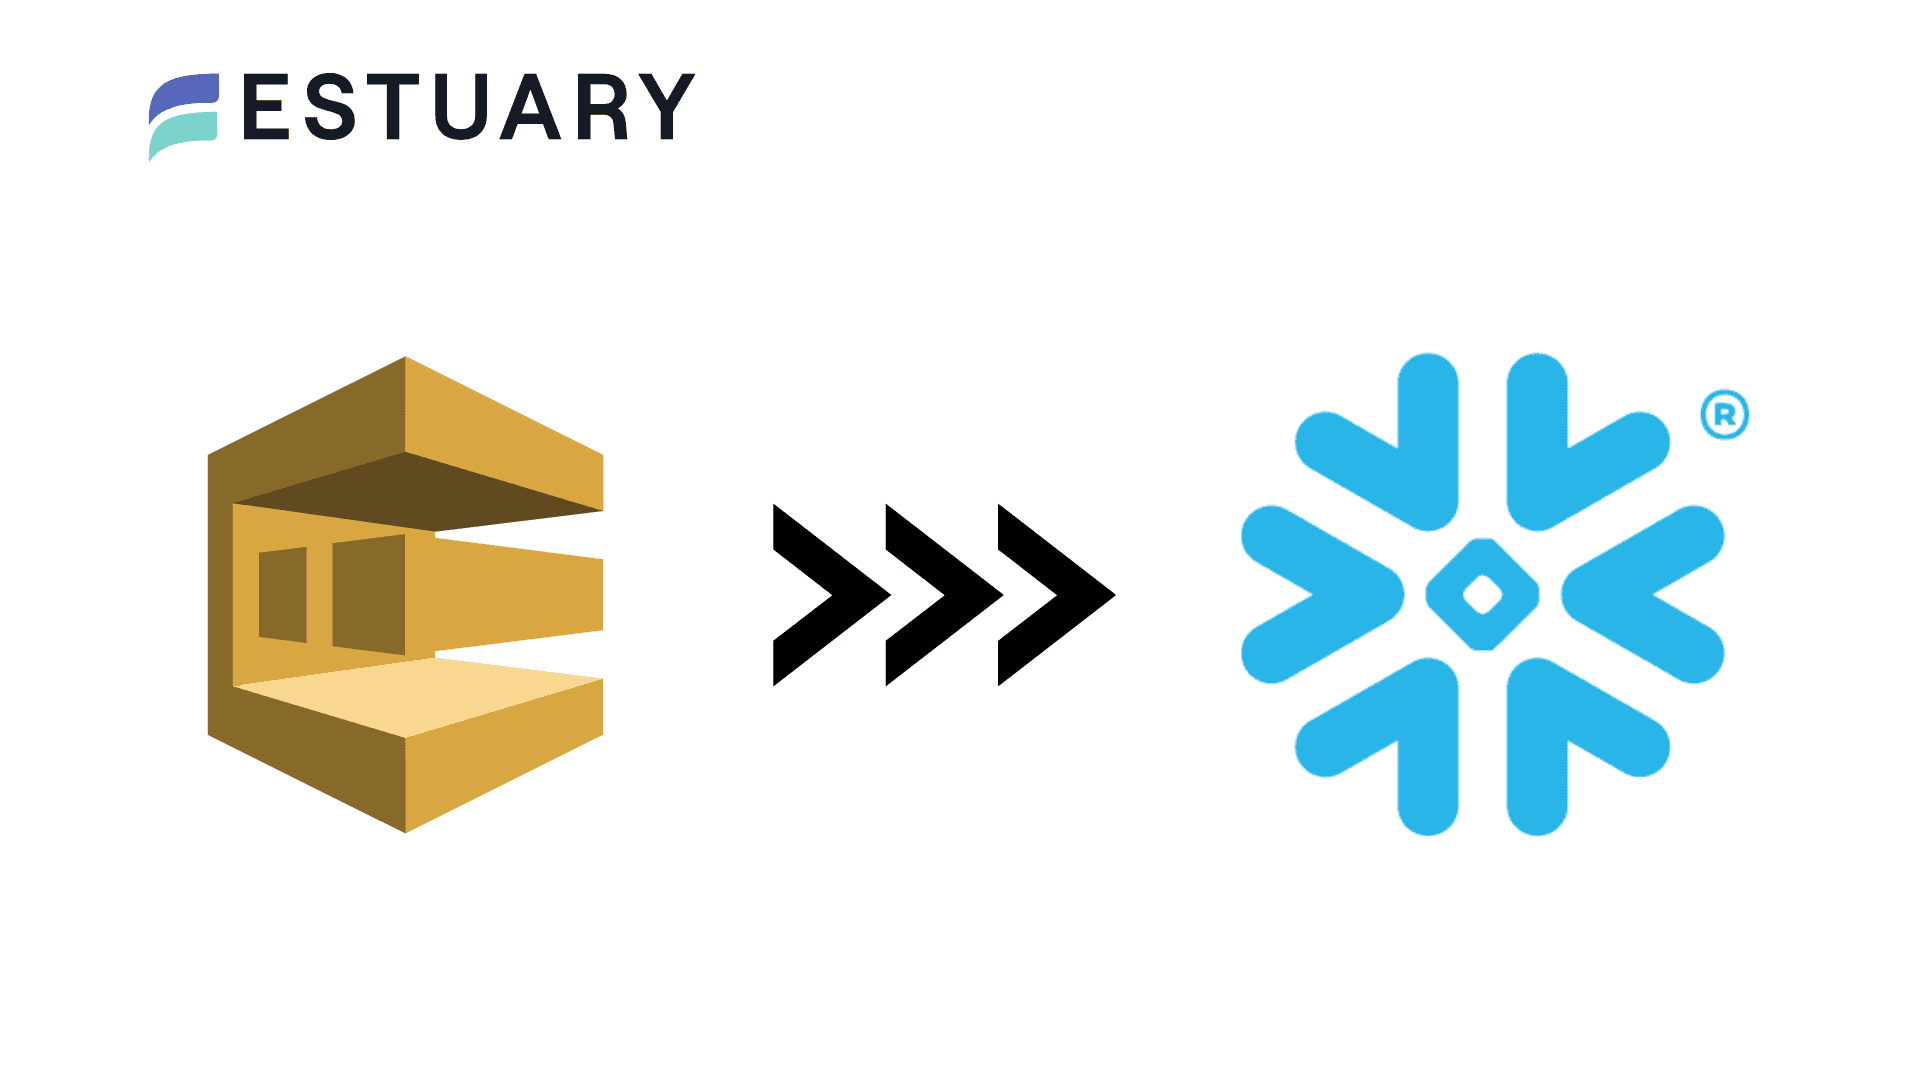 Load Data From Amazon SQS to Snowflake (Complete Guide)